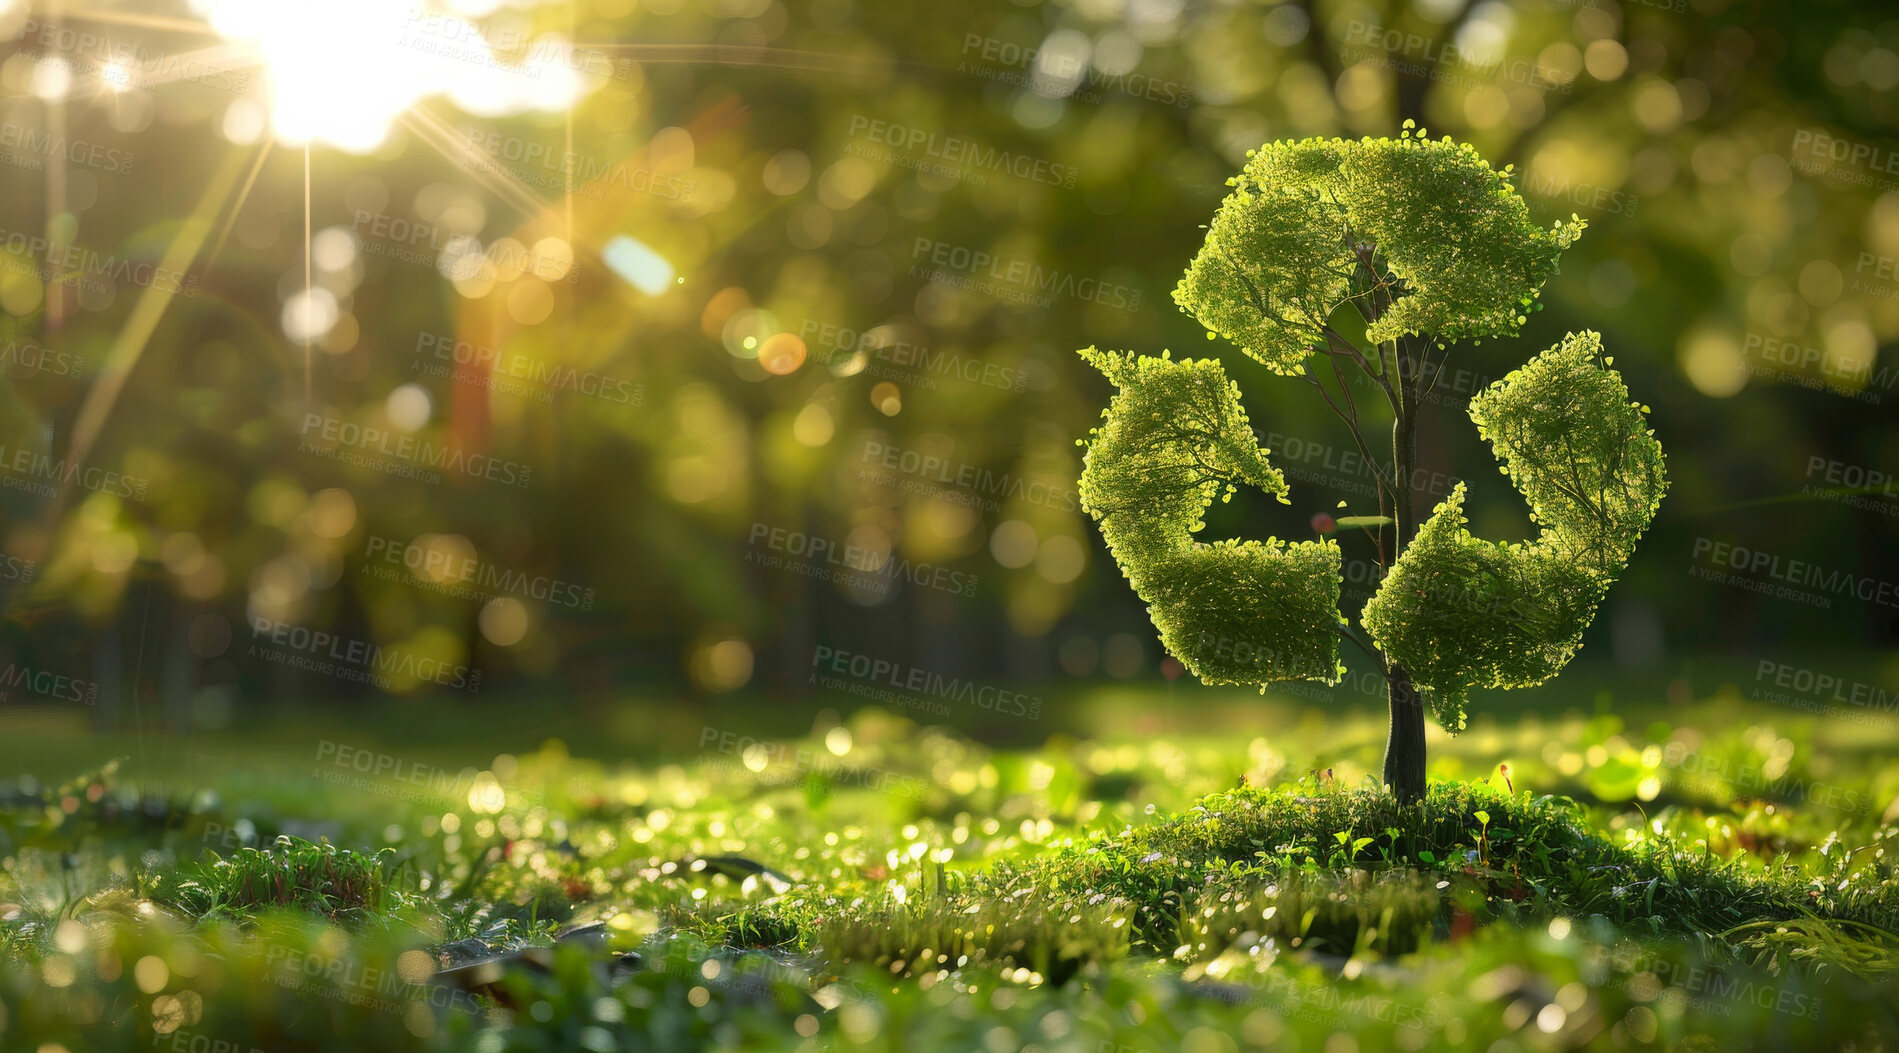 Buy stock photo Recycle, sign and tree in a park on nature background for environmental, awareness and sustainability concept. Green grass, mockup and symbol with copyspace for Earth Day, eco system or ecology logo